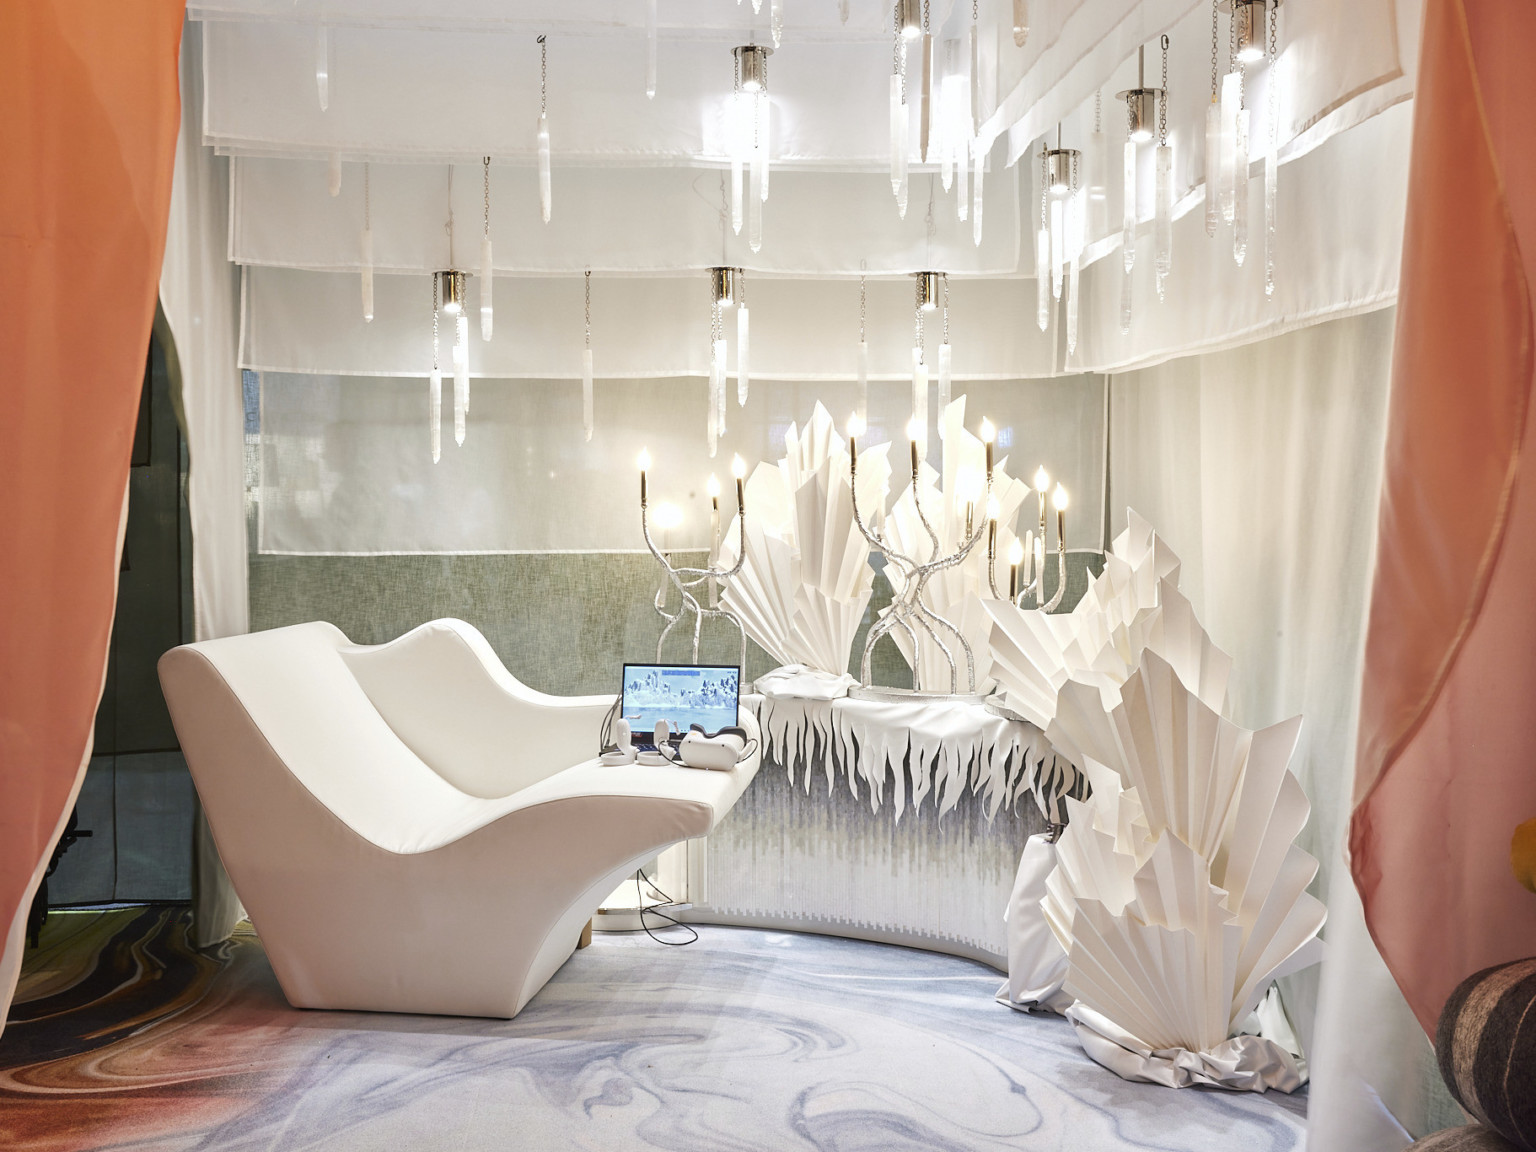 All white wintery room with ice shard style sculptures and organically curving candelabra lights framed by peach toned curtains